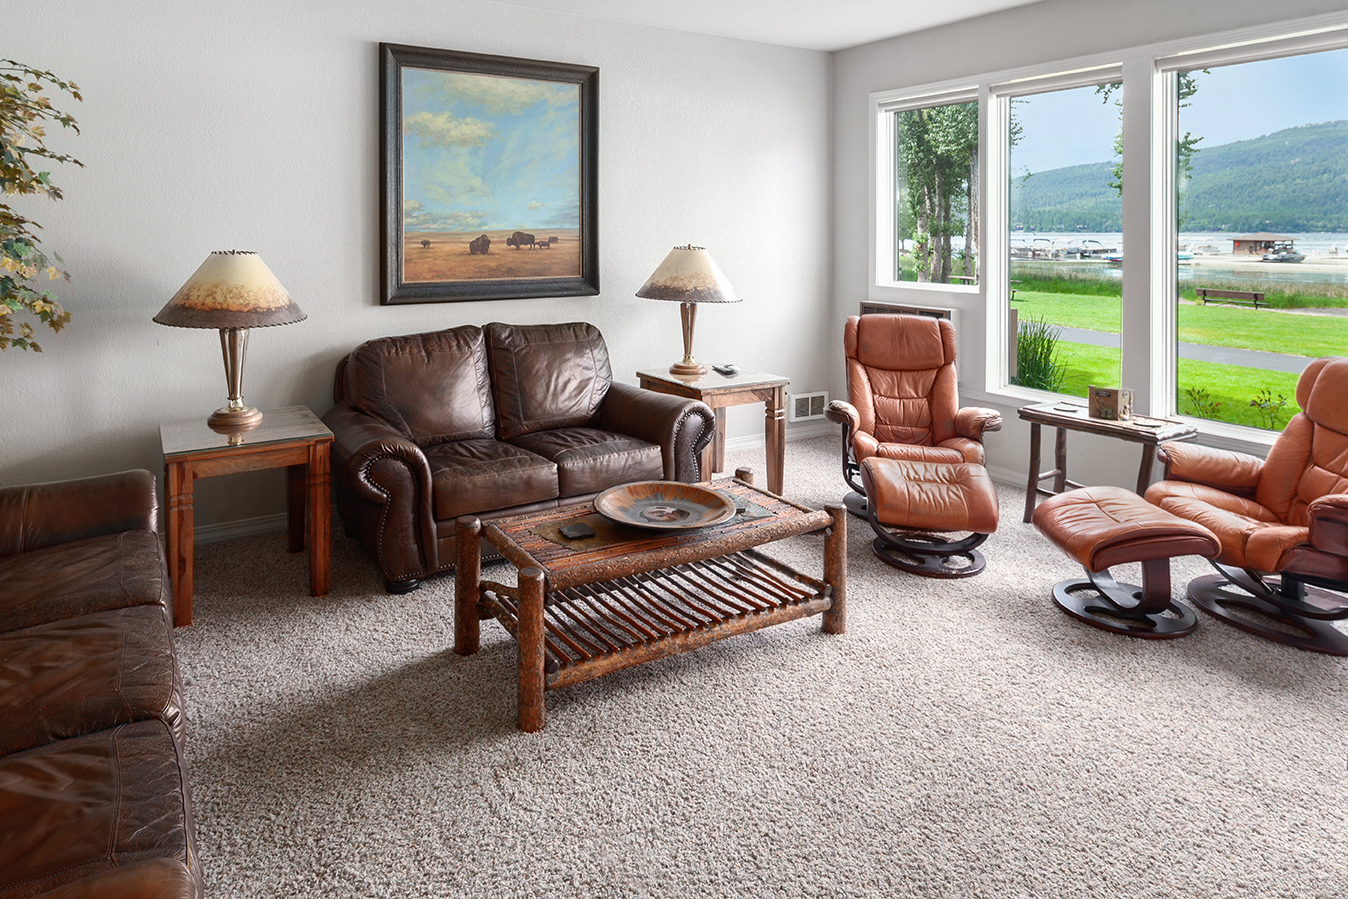 All Lodge condominiums have views of Whitefish Lake. – Lindsay Goudreau